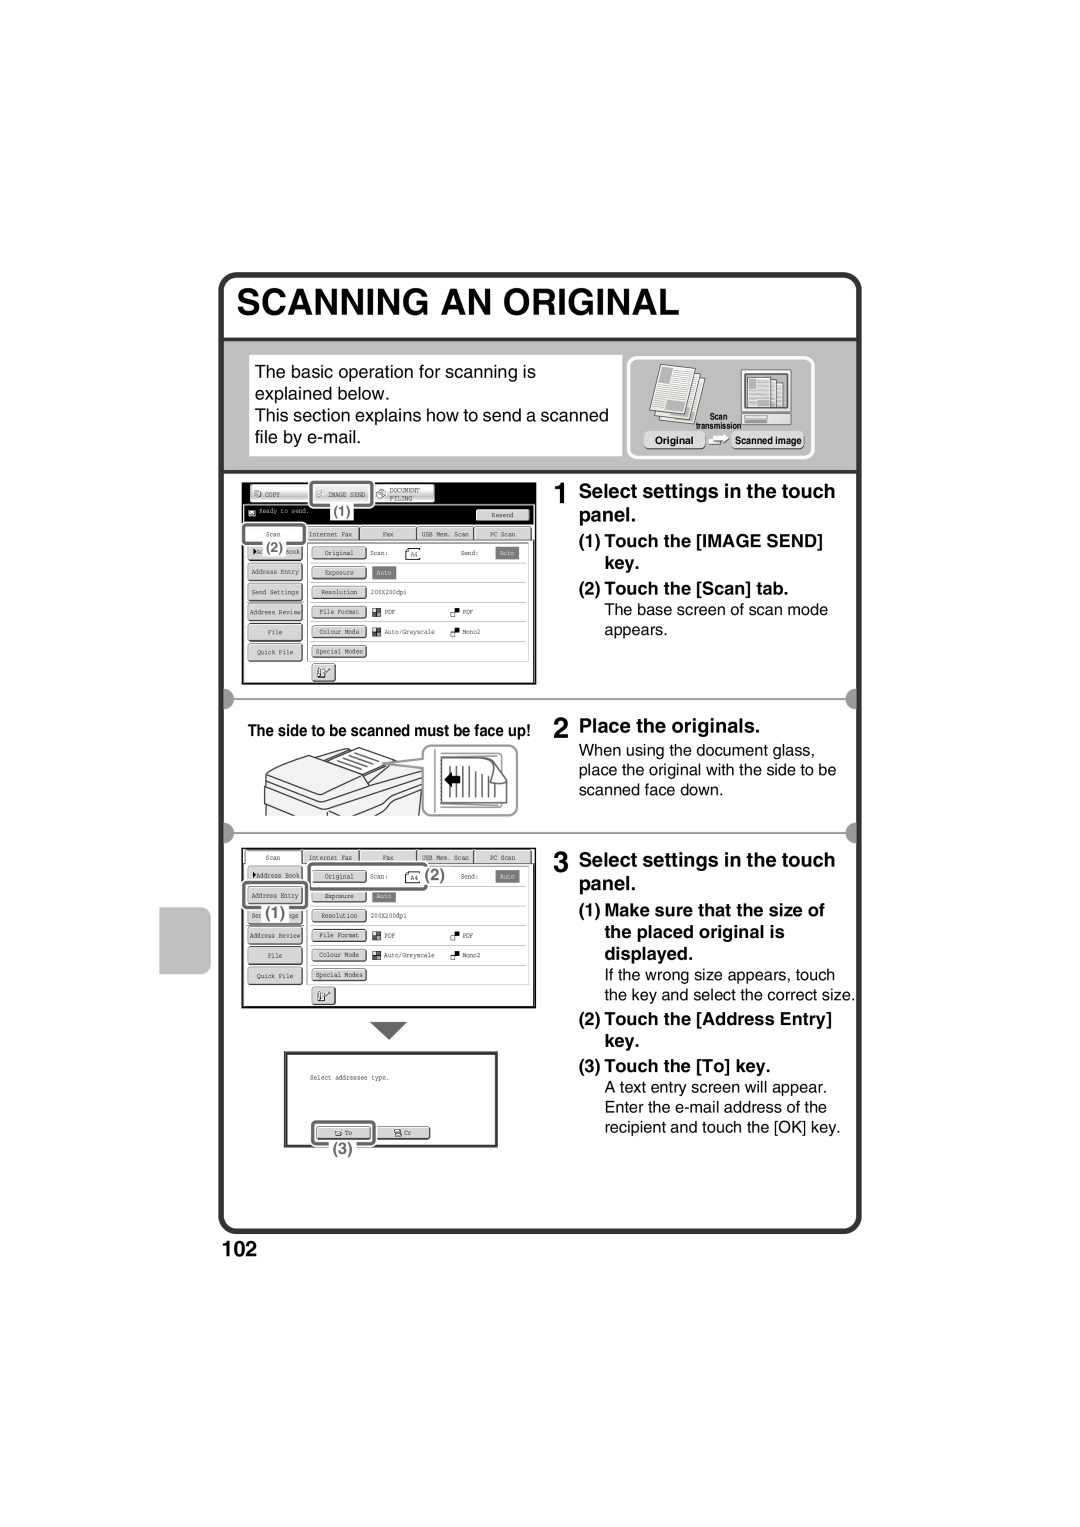 Sharp MX-C311 Scanning An Original, Select settings in the touch panel, Touch the IMAGE SEND key 2 Touch the Scan tab 